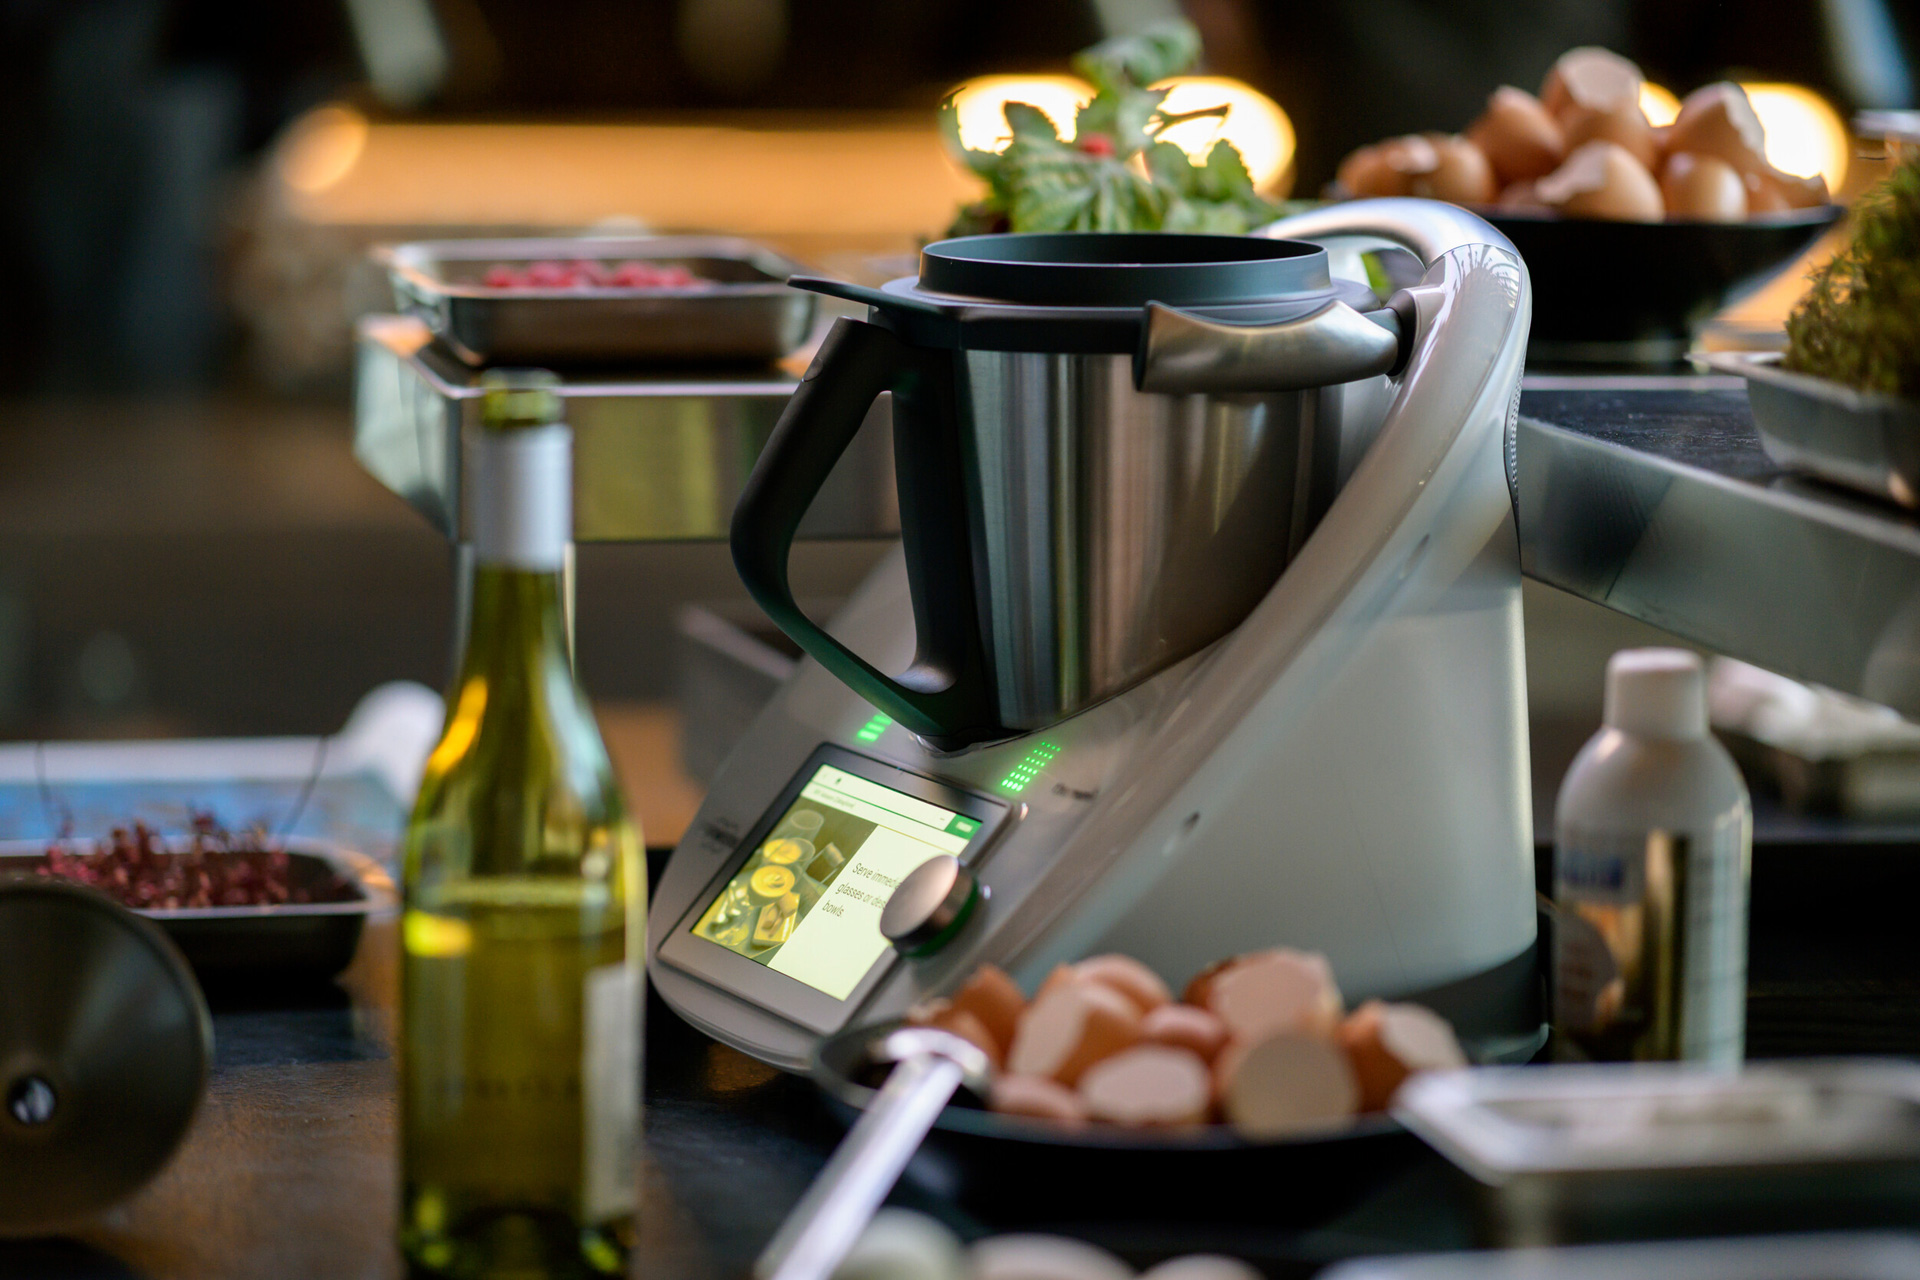 Parts of the eiSos can be found in E-Bikes and the Thermomix.